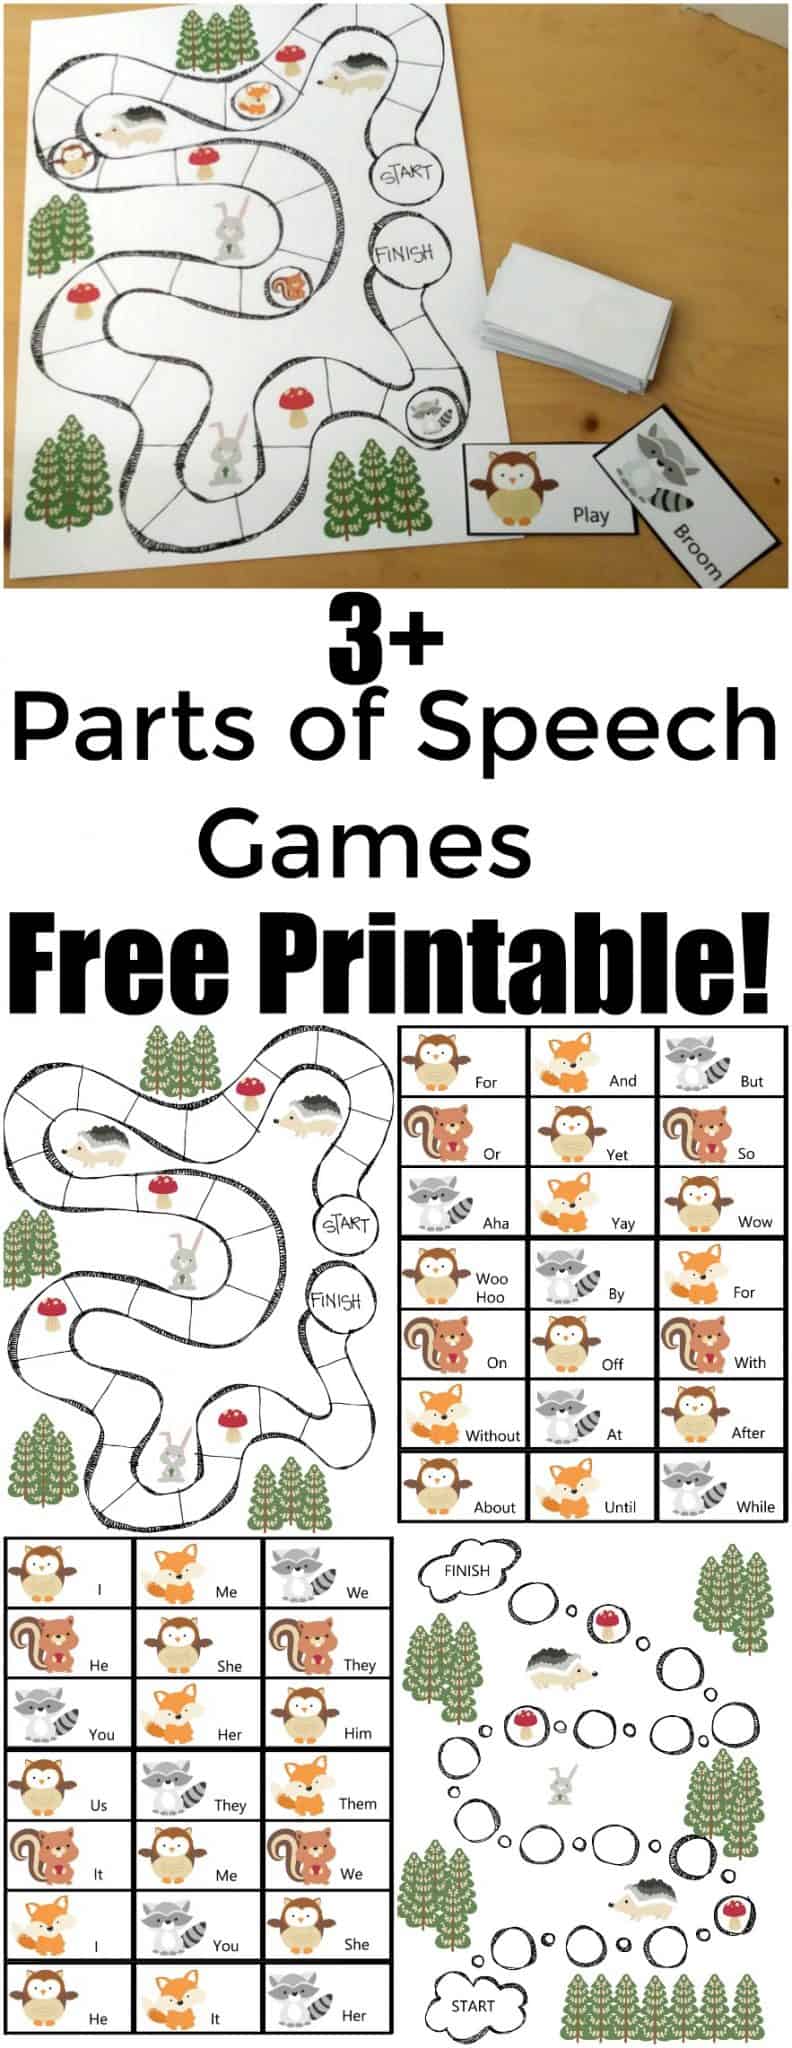 Parts of Speech Game - More than 3 Parts of speech games in this Free Printable pack